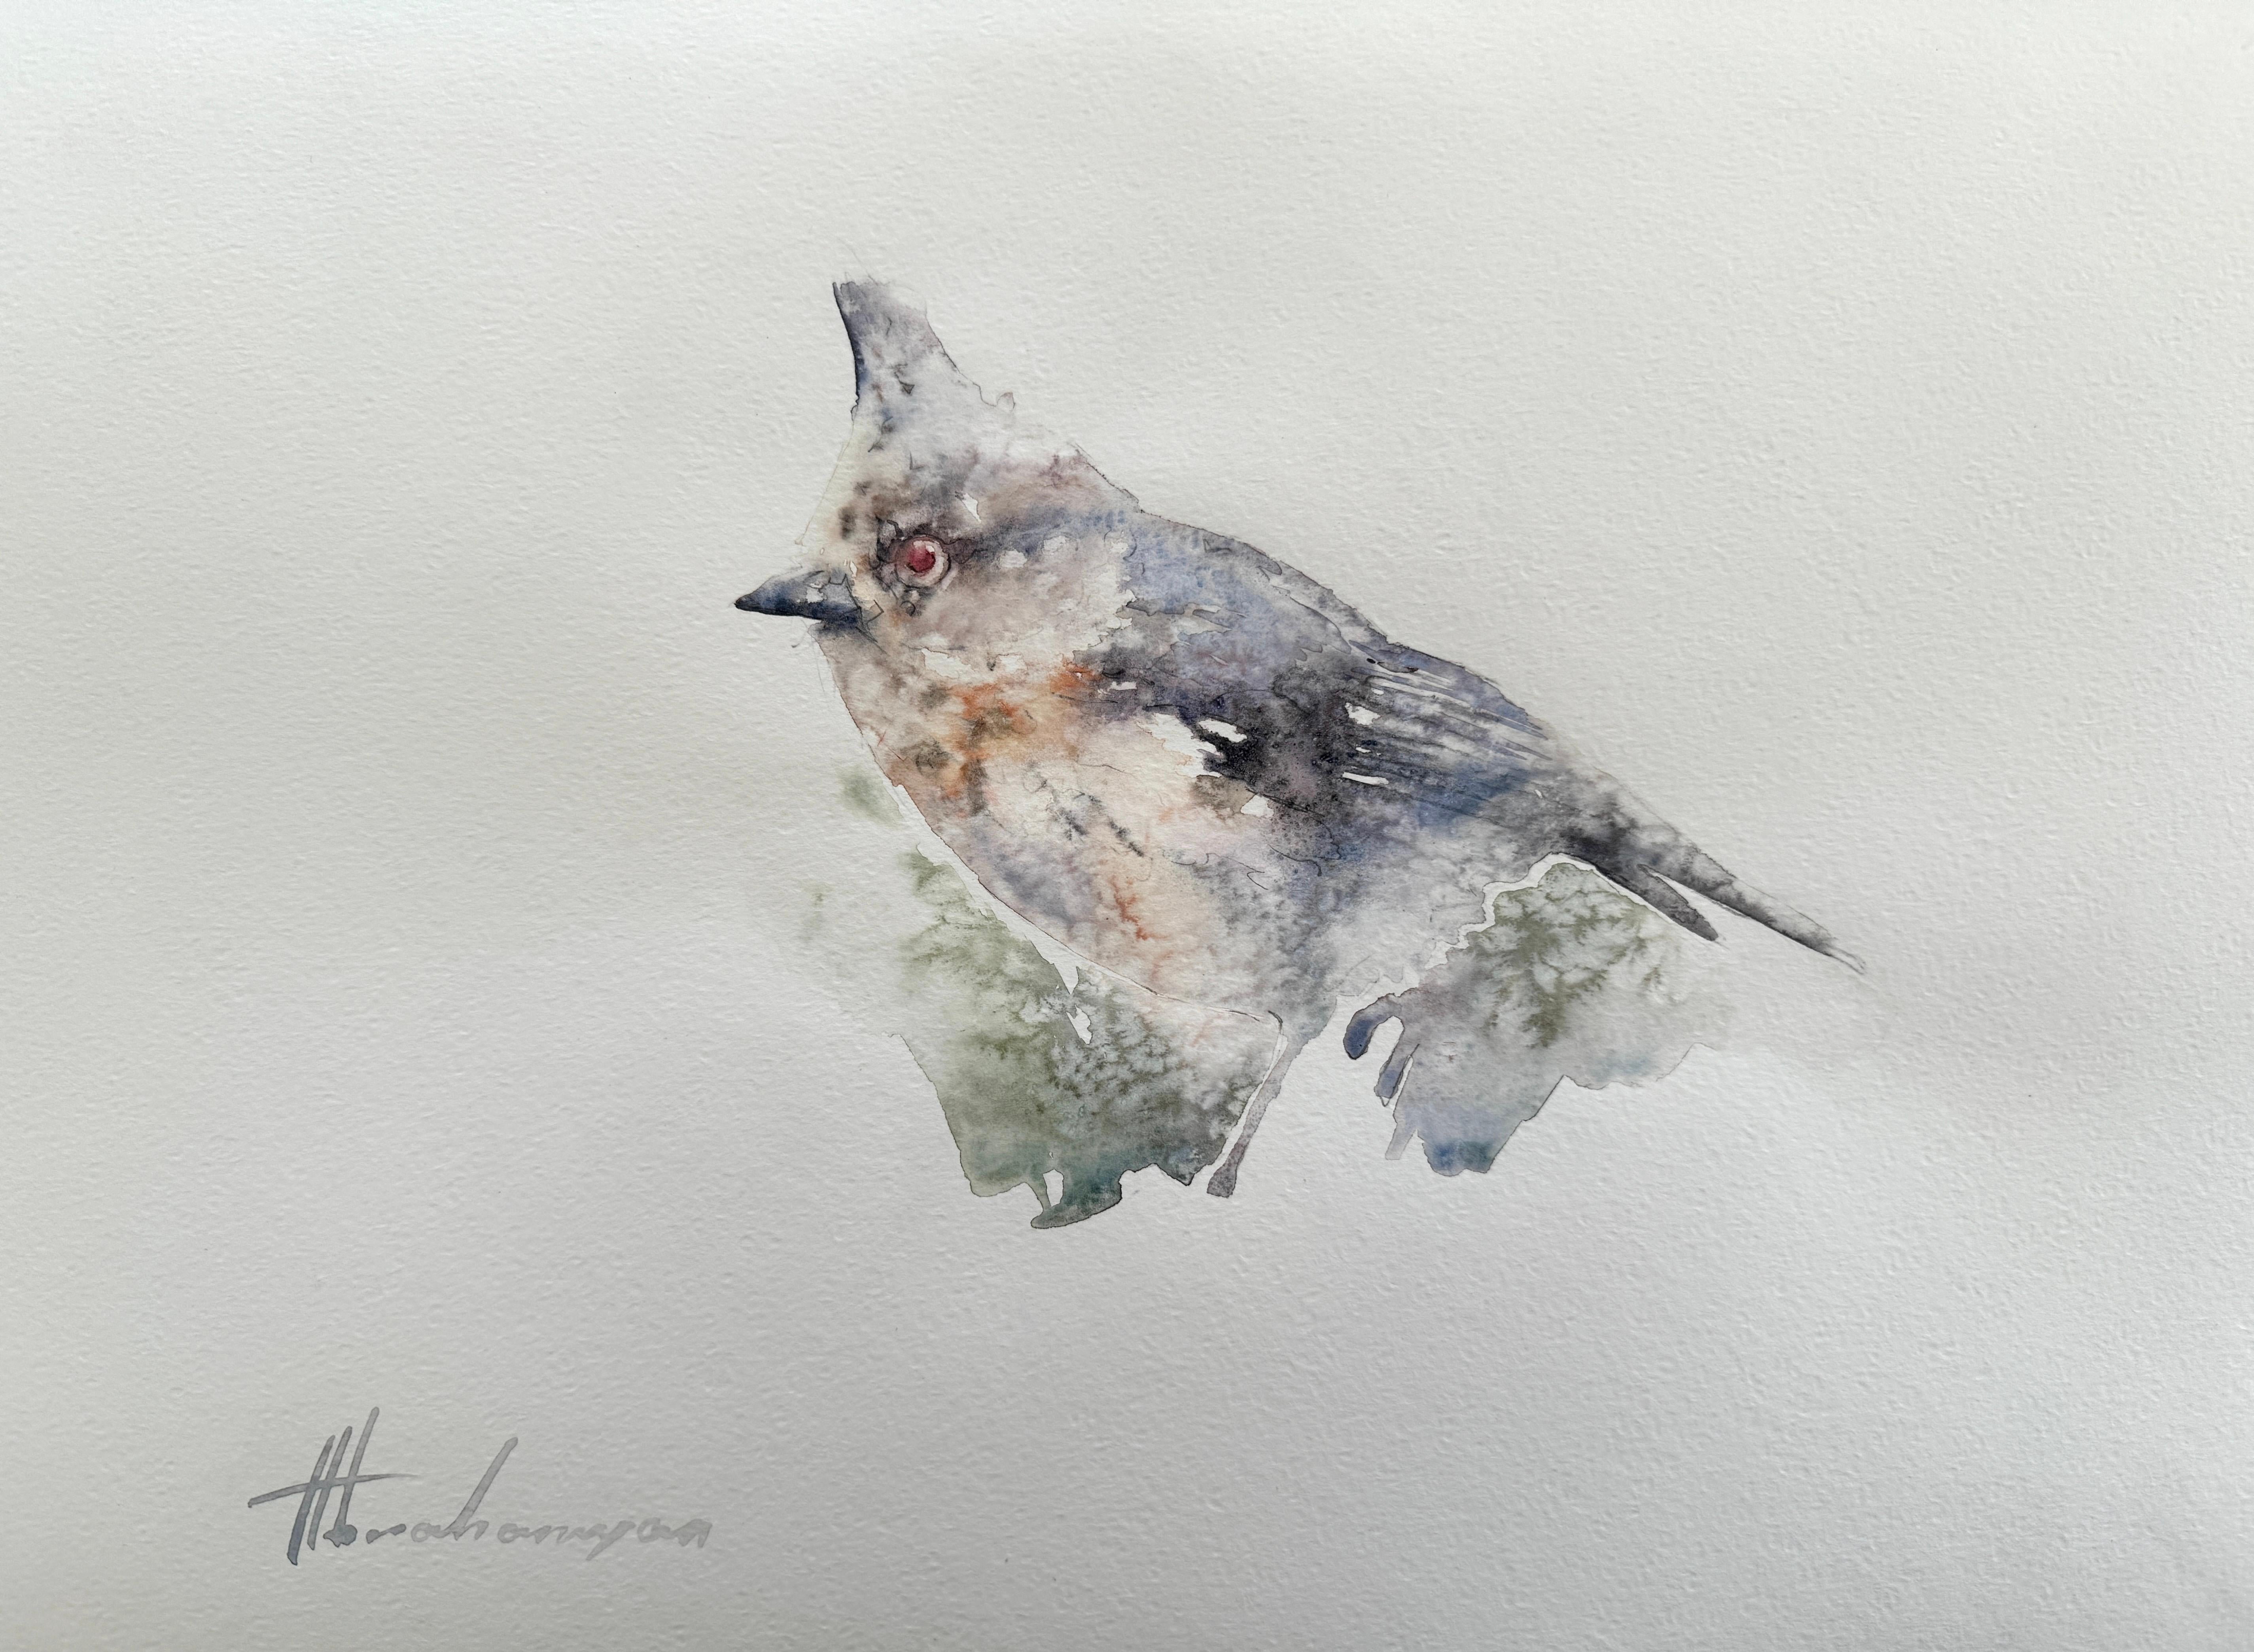 Artyom Abrahamyan Animal Art - Tufted Bird, Watercolor Handmade Painting, One of a Kind